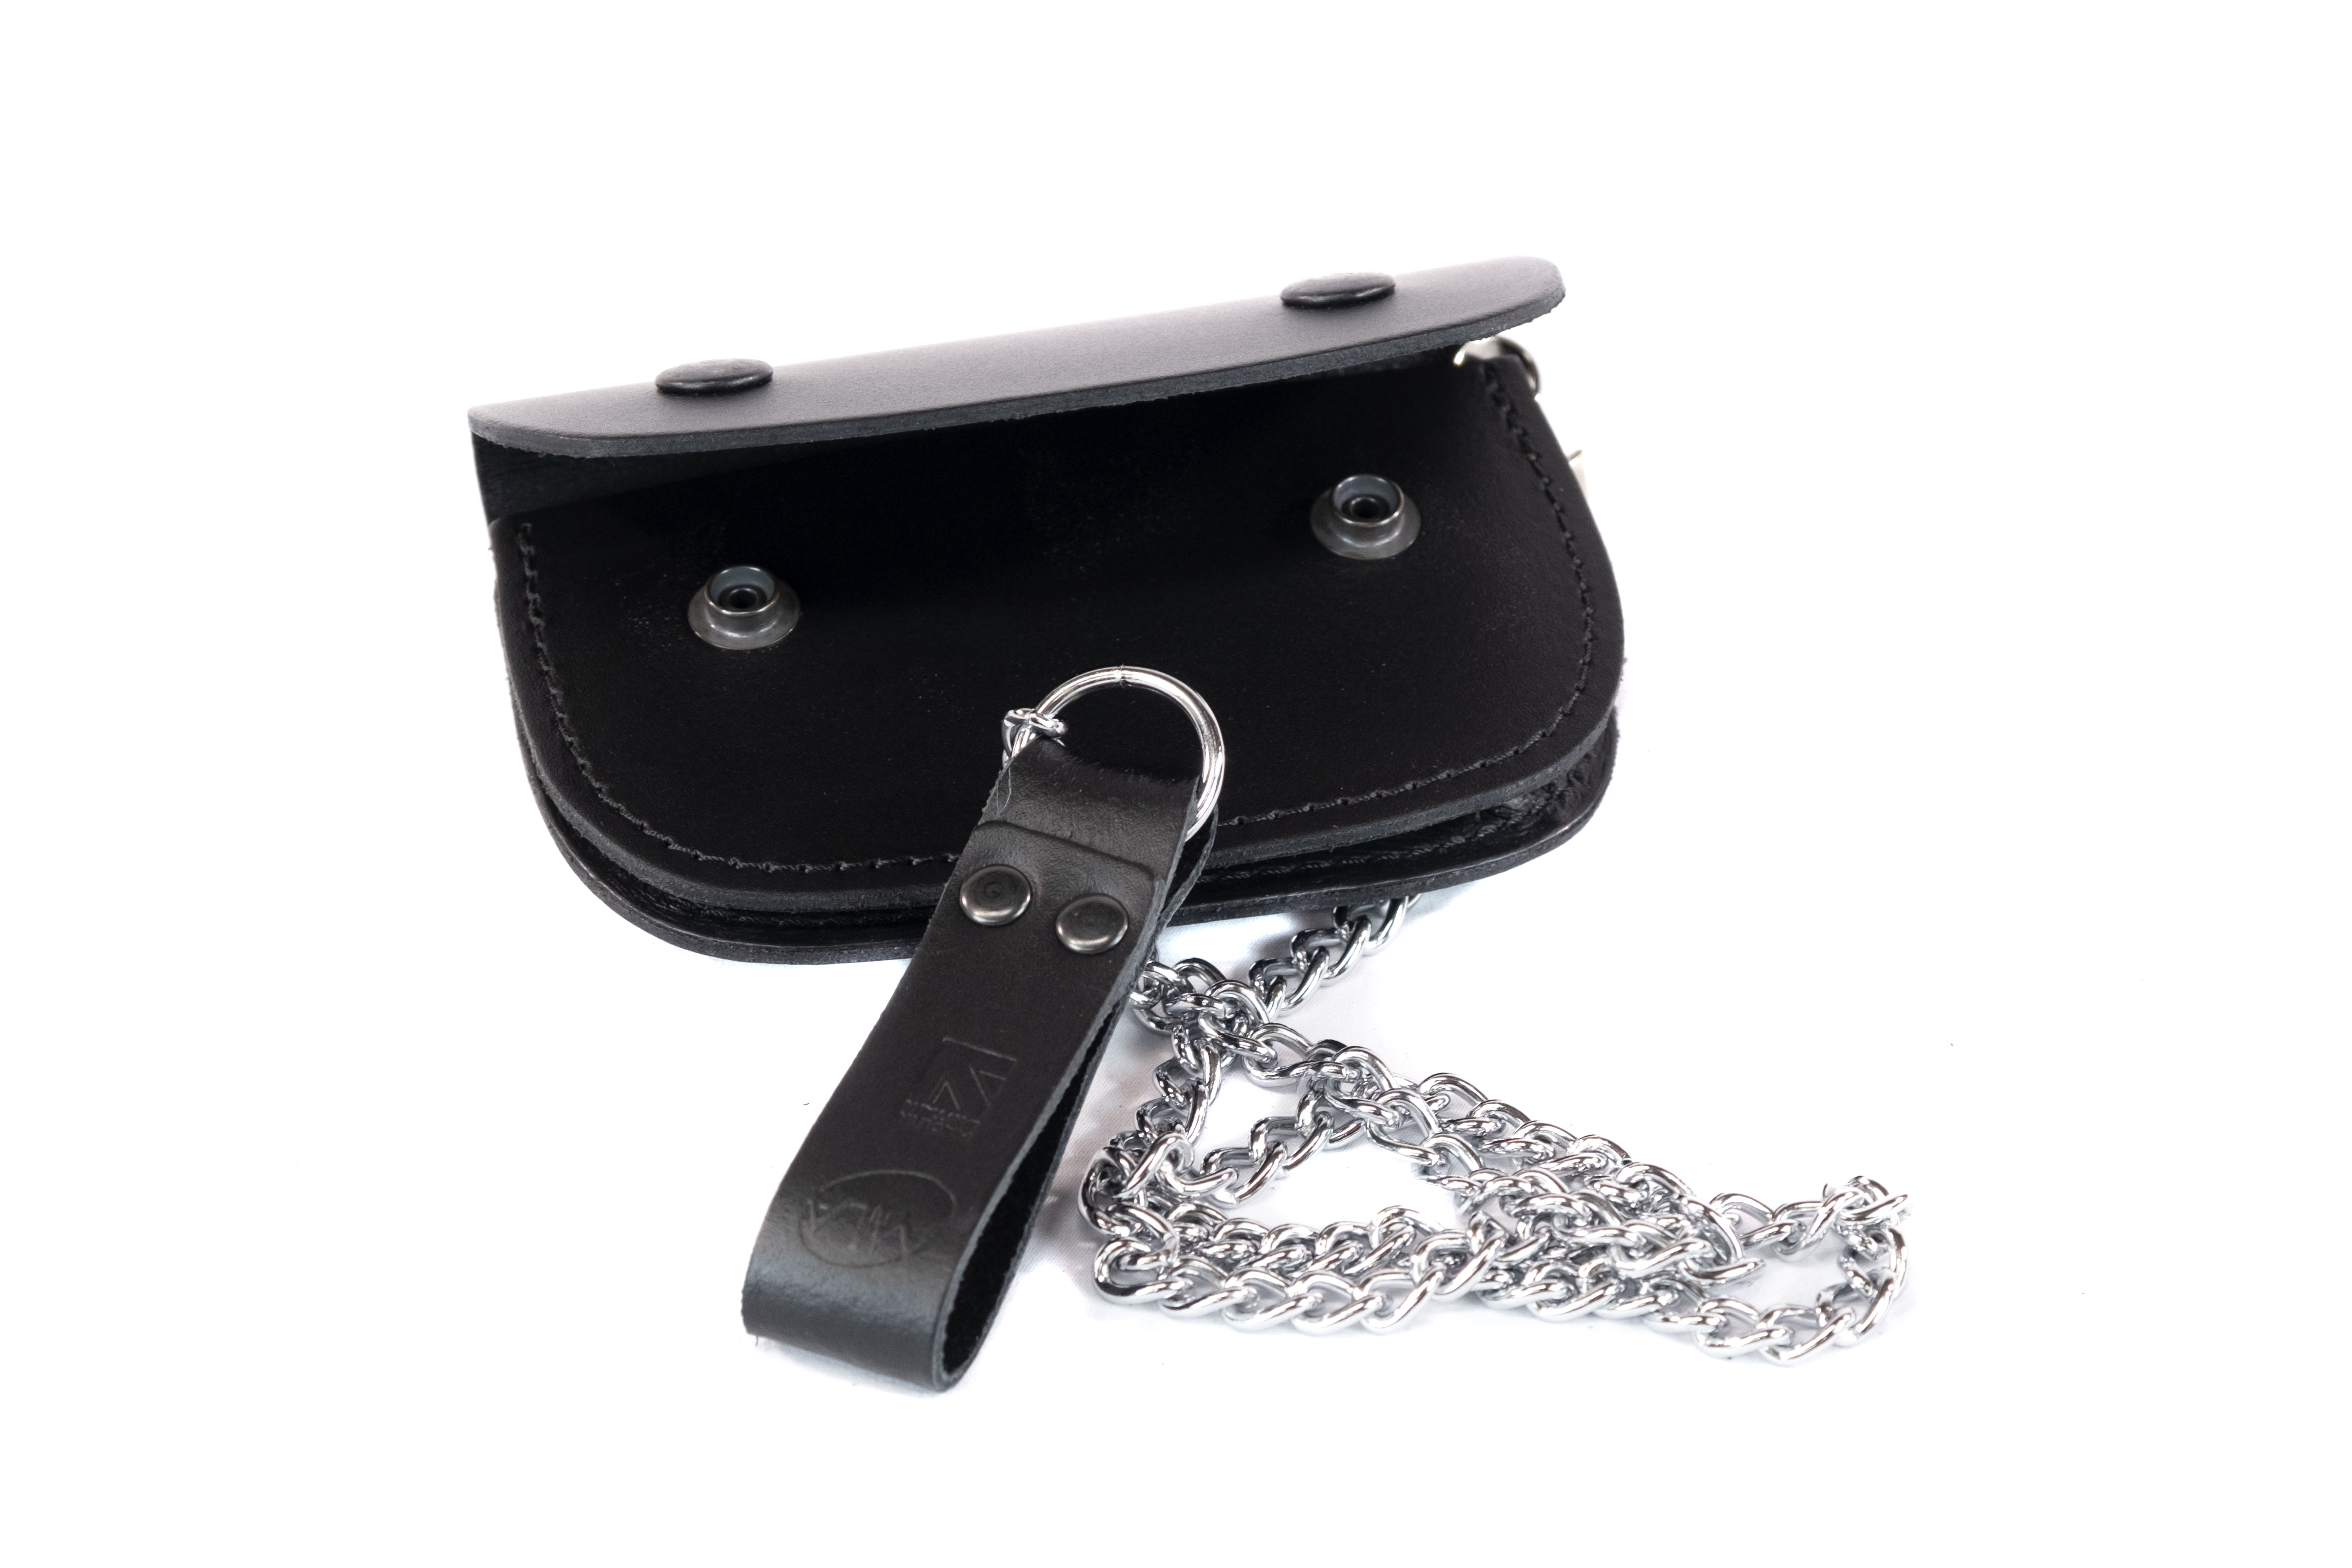 Leather Officer Key Pouch : CopShopUK